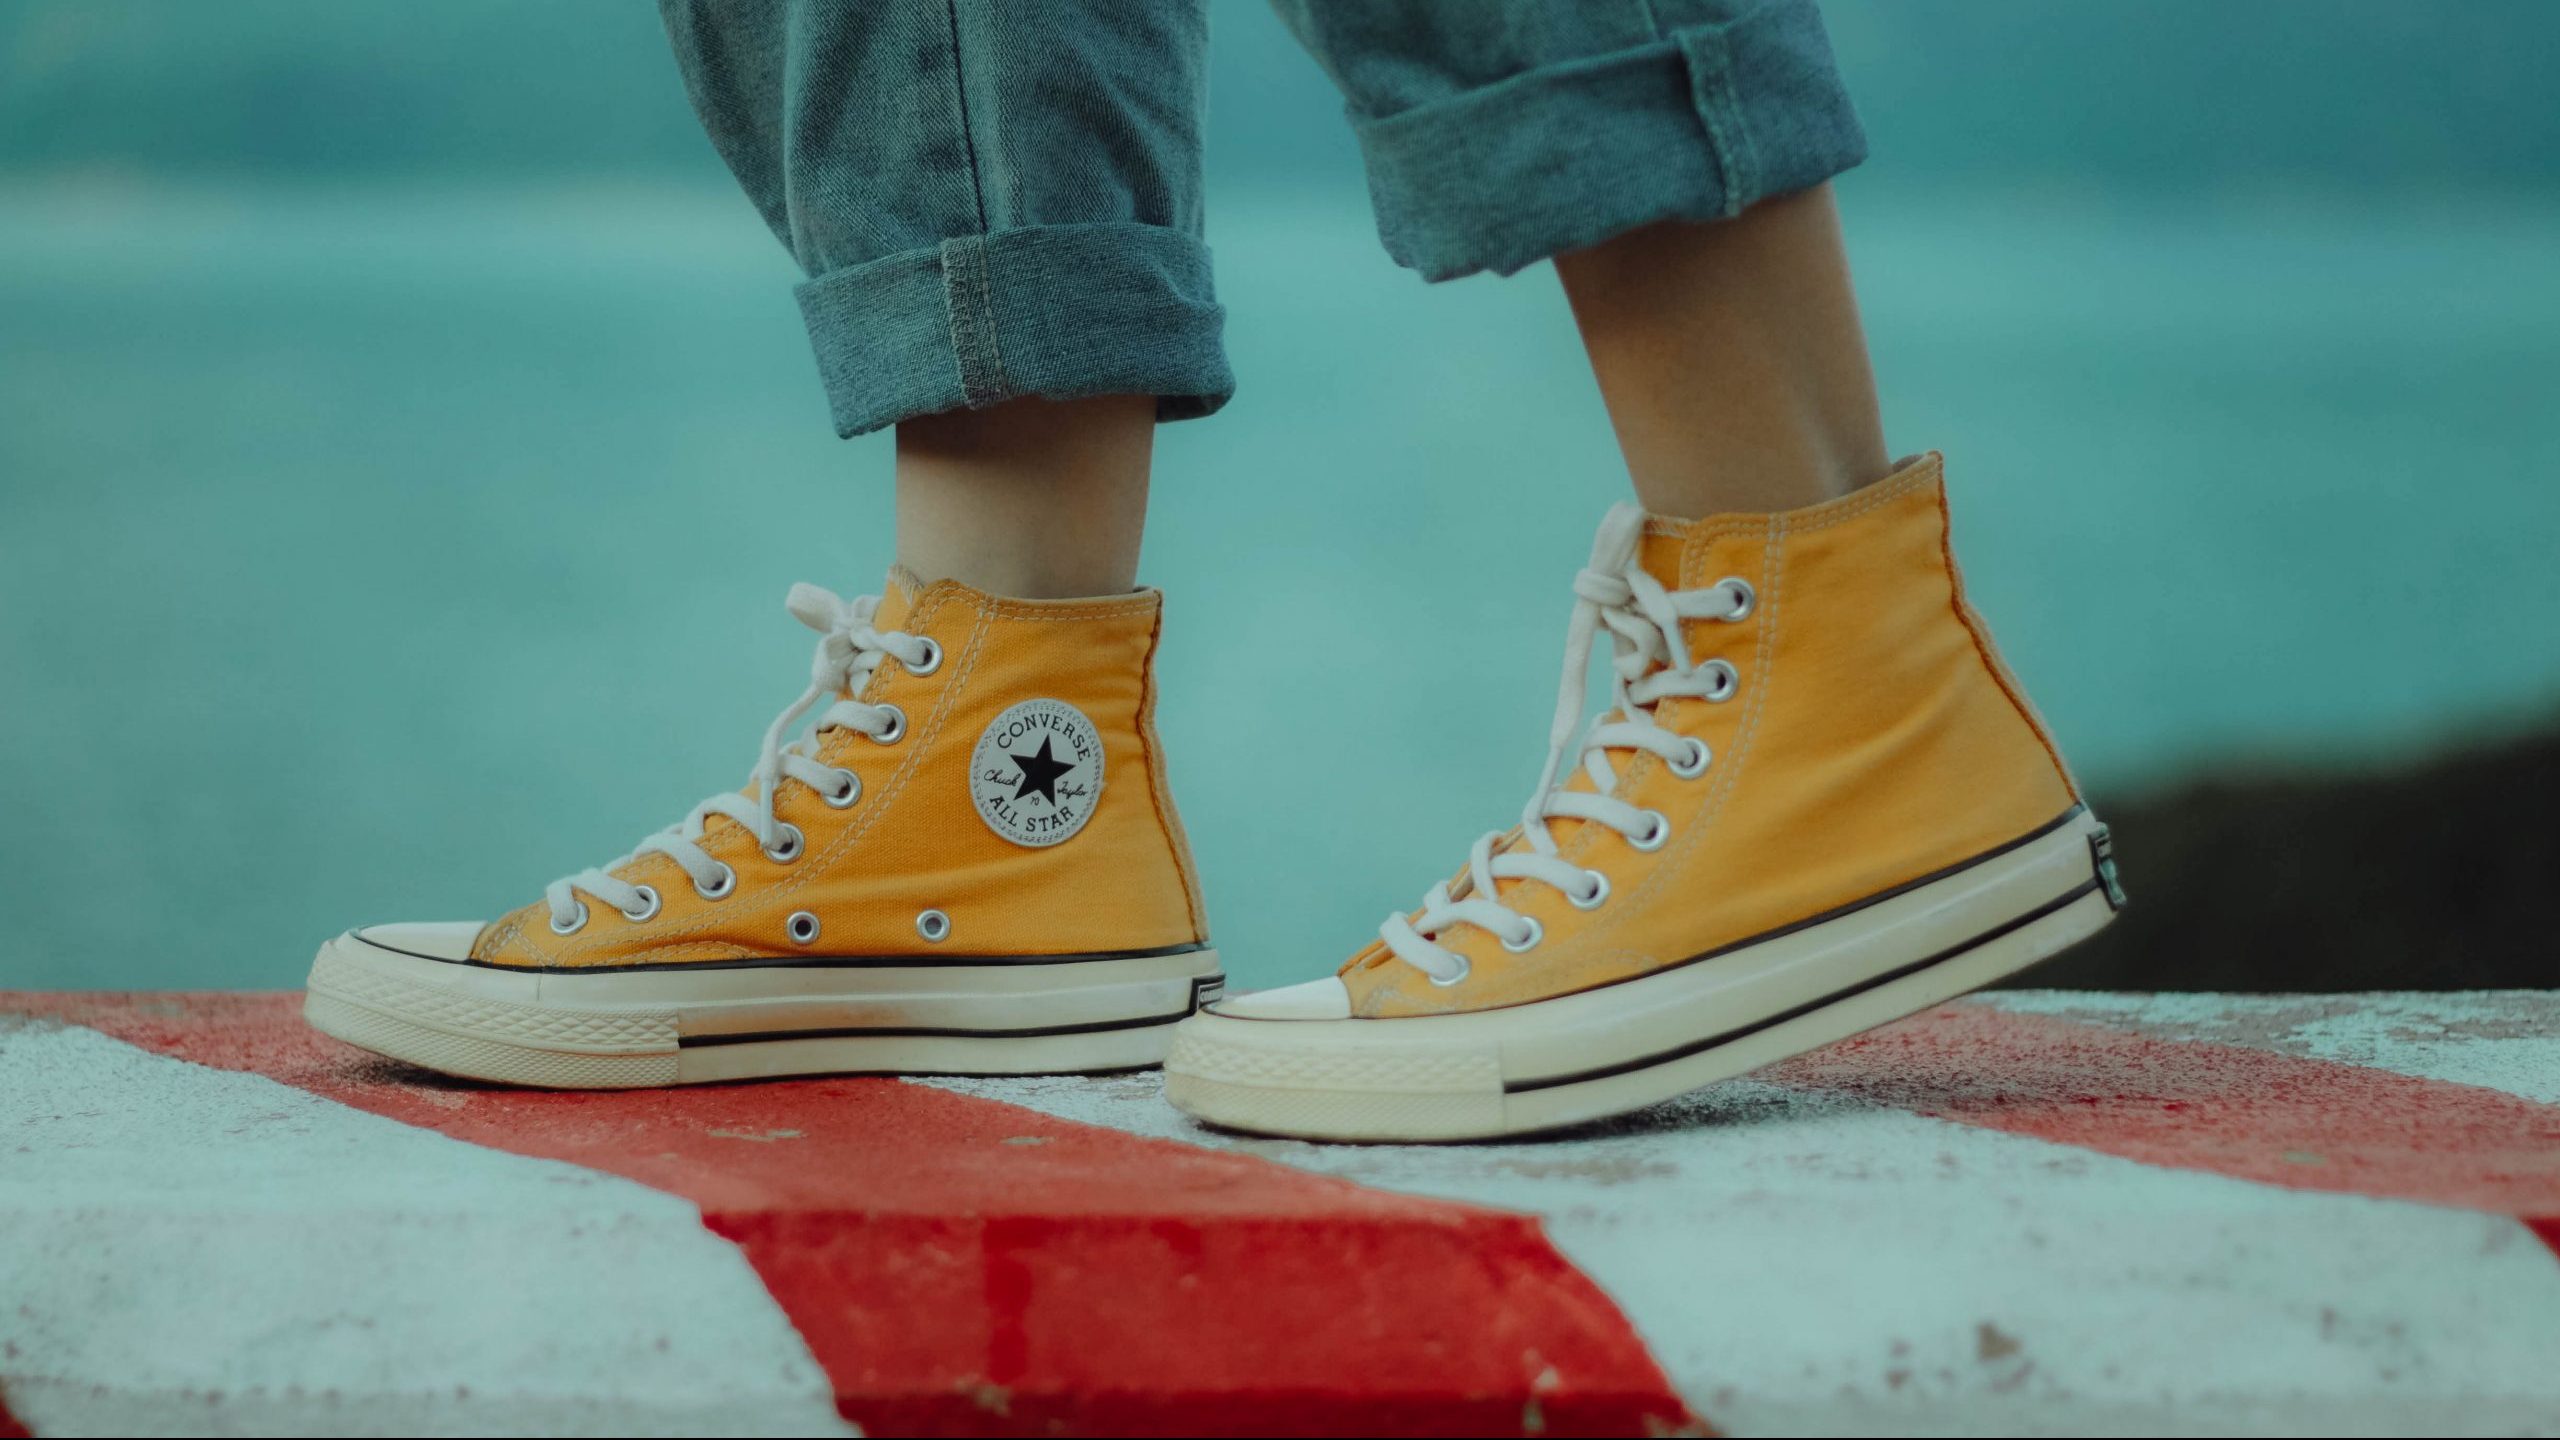 Converse: The Shoe That Never Gets Old 